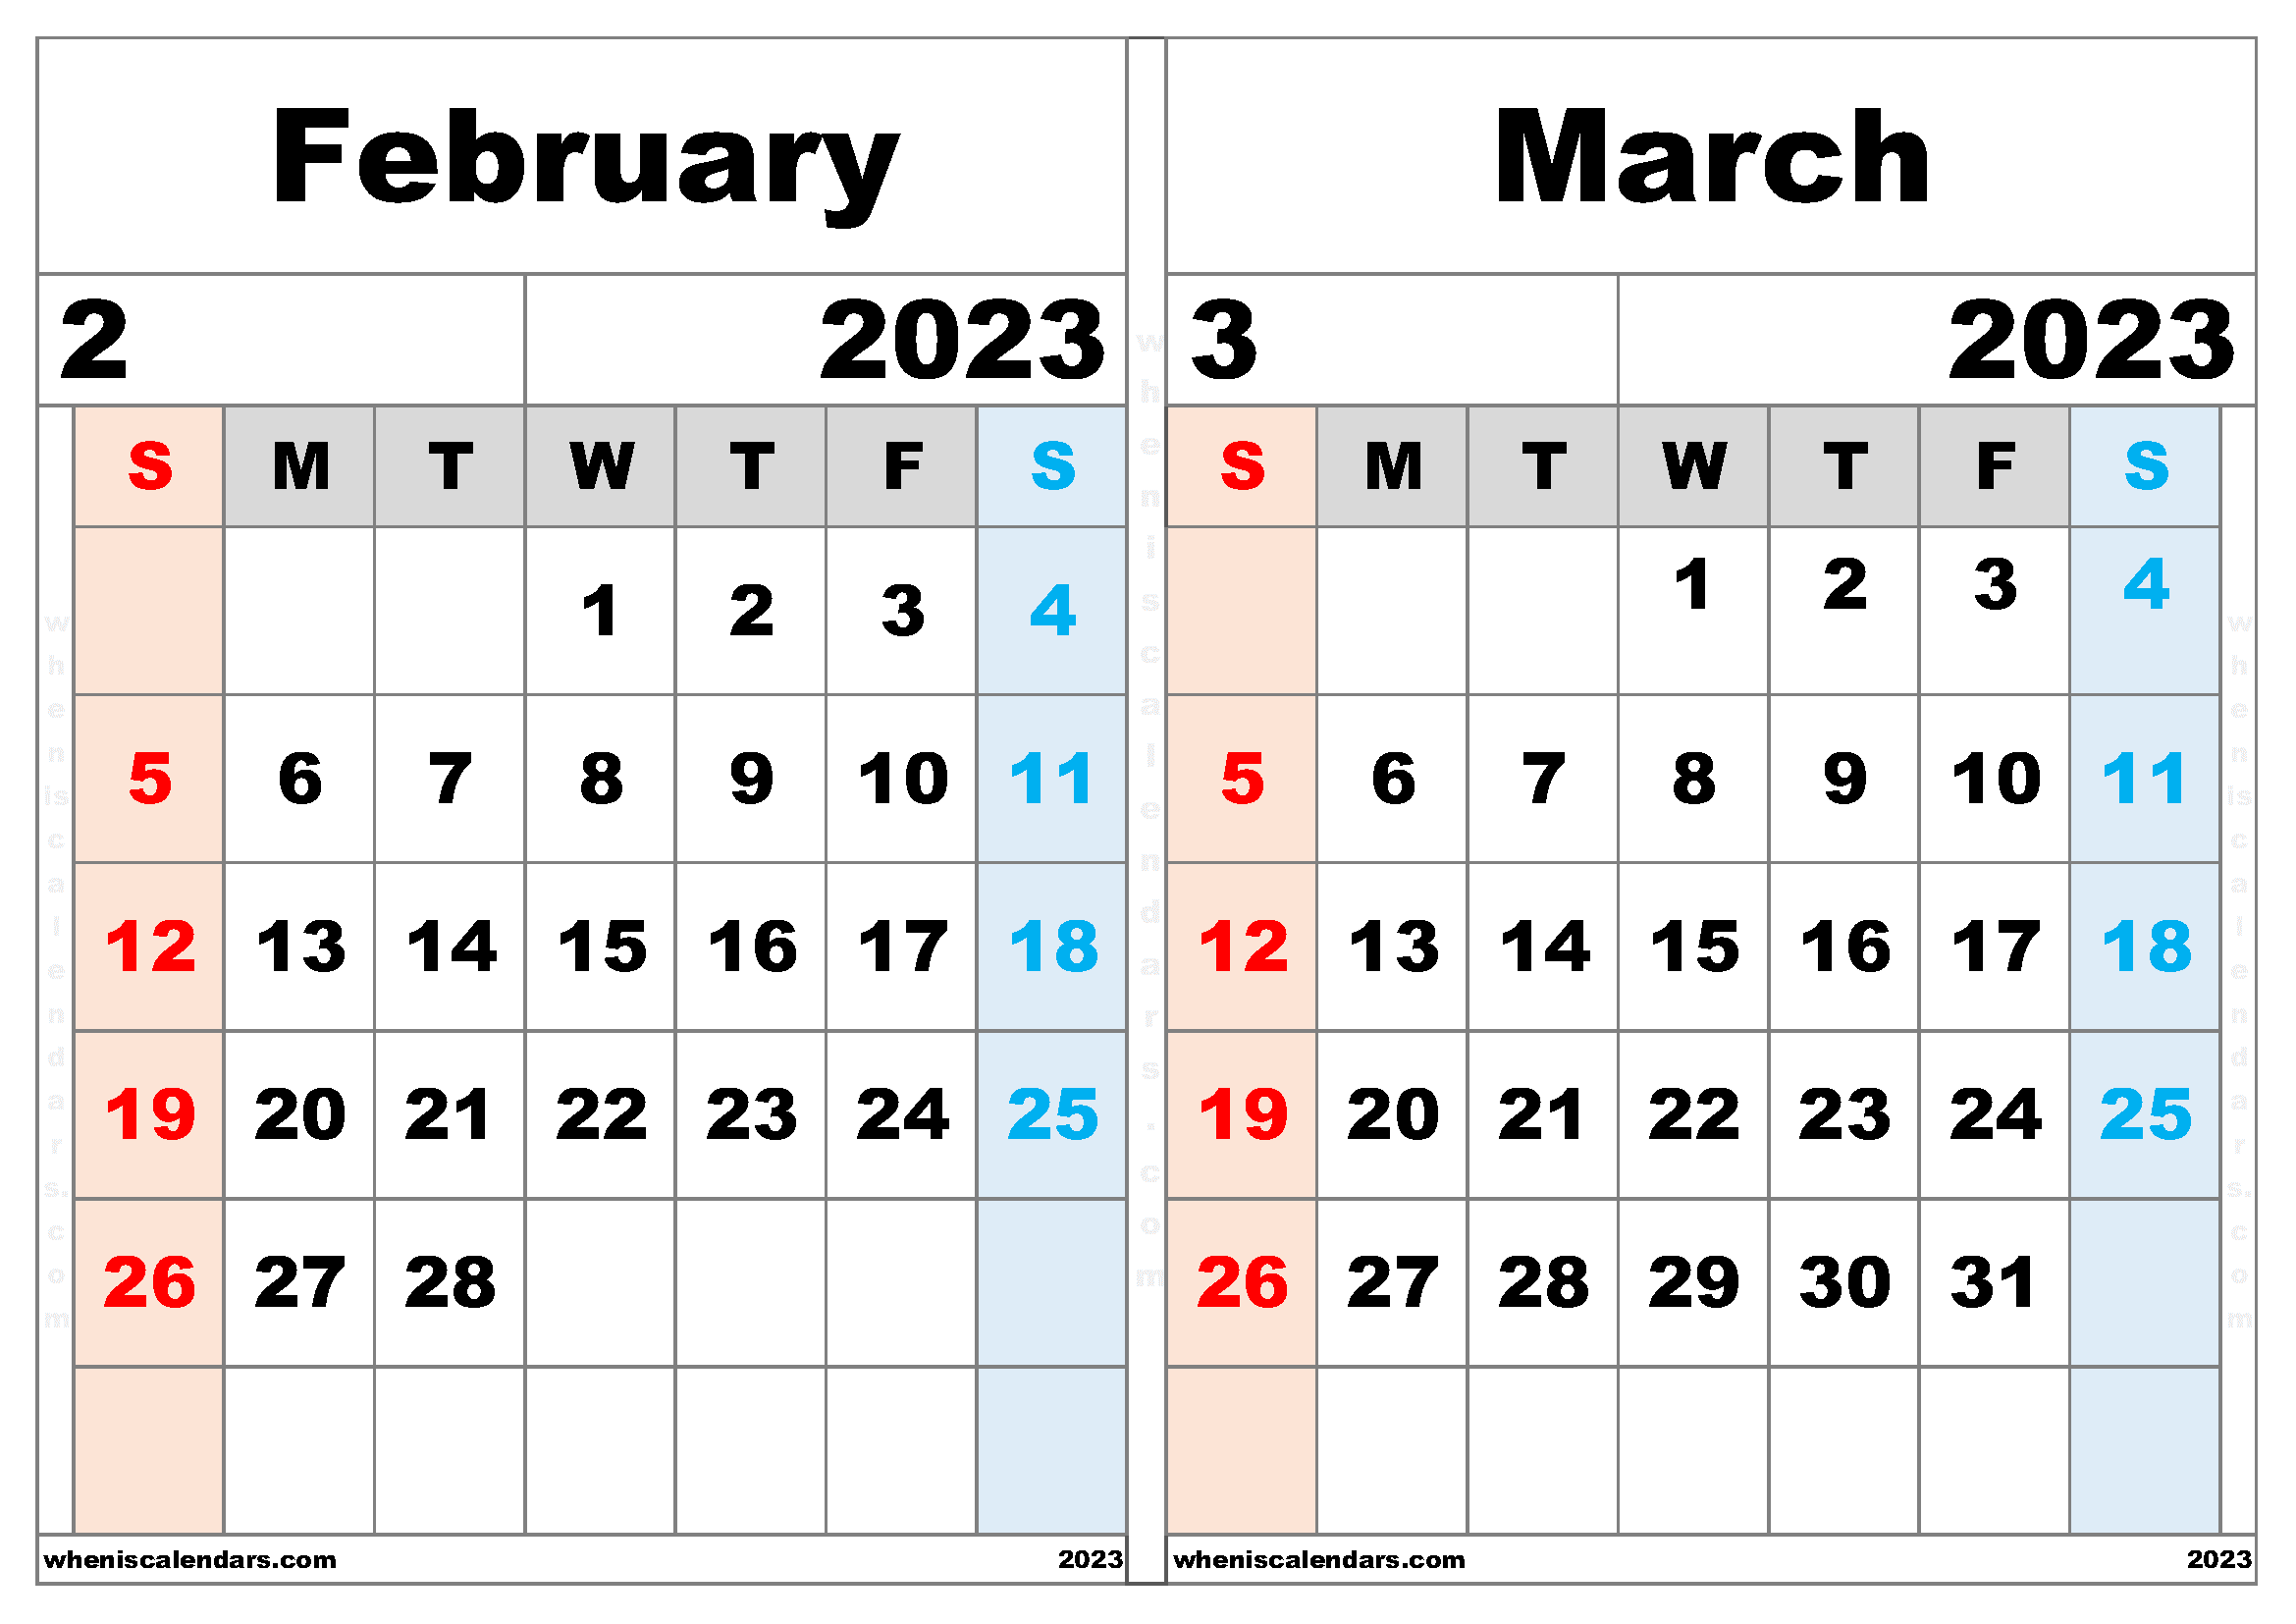 Calendar February and March 2023 Template (FM2306)